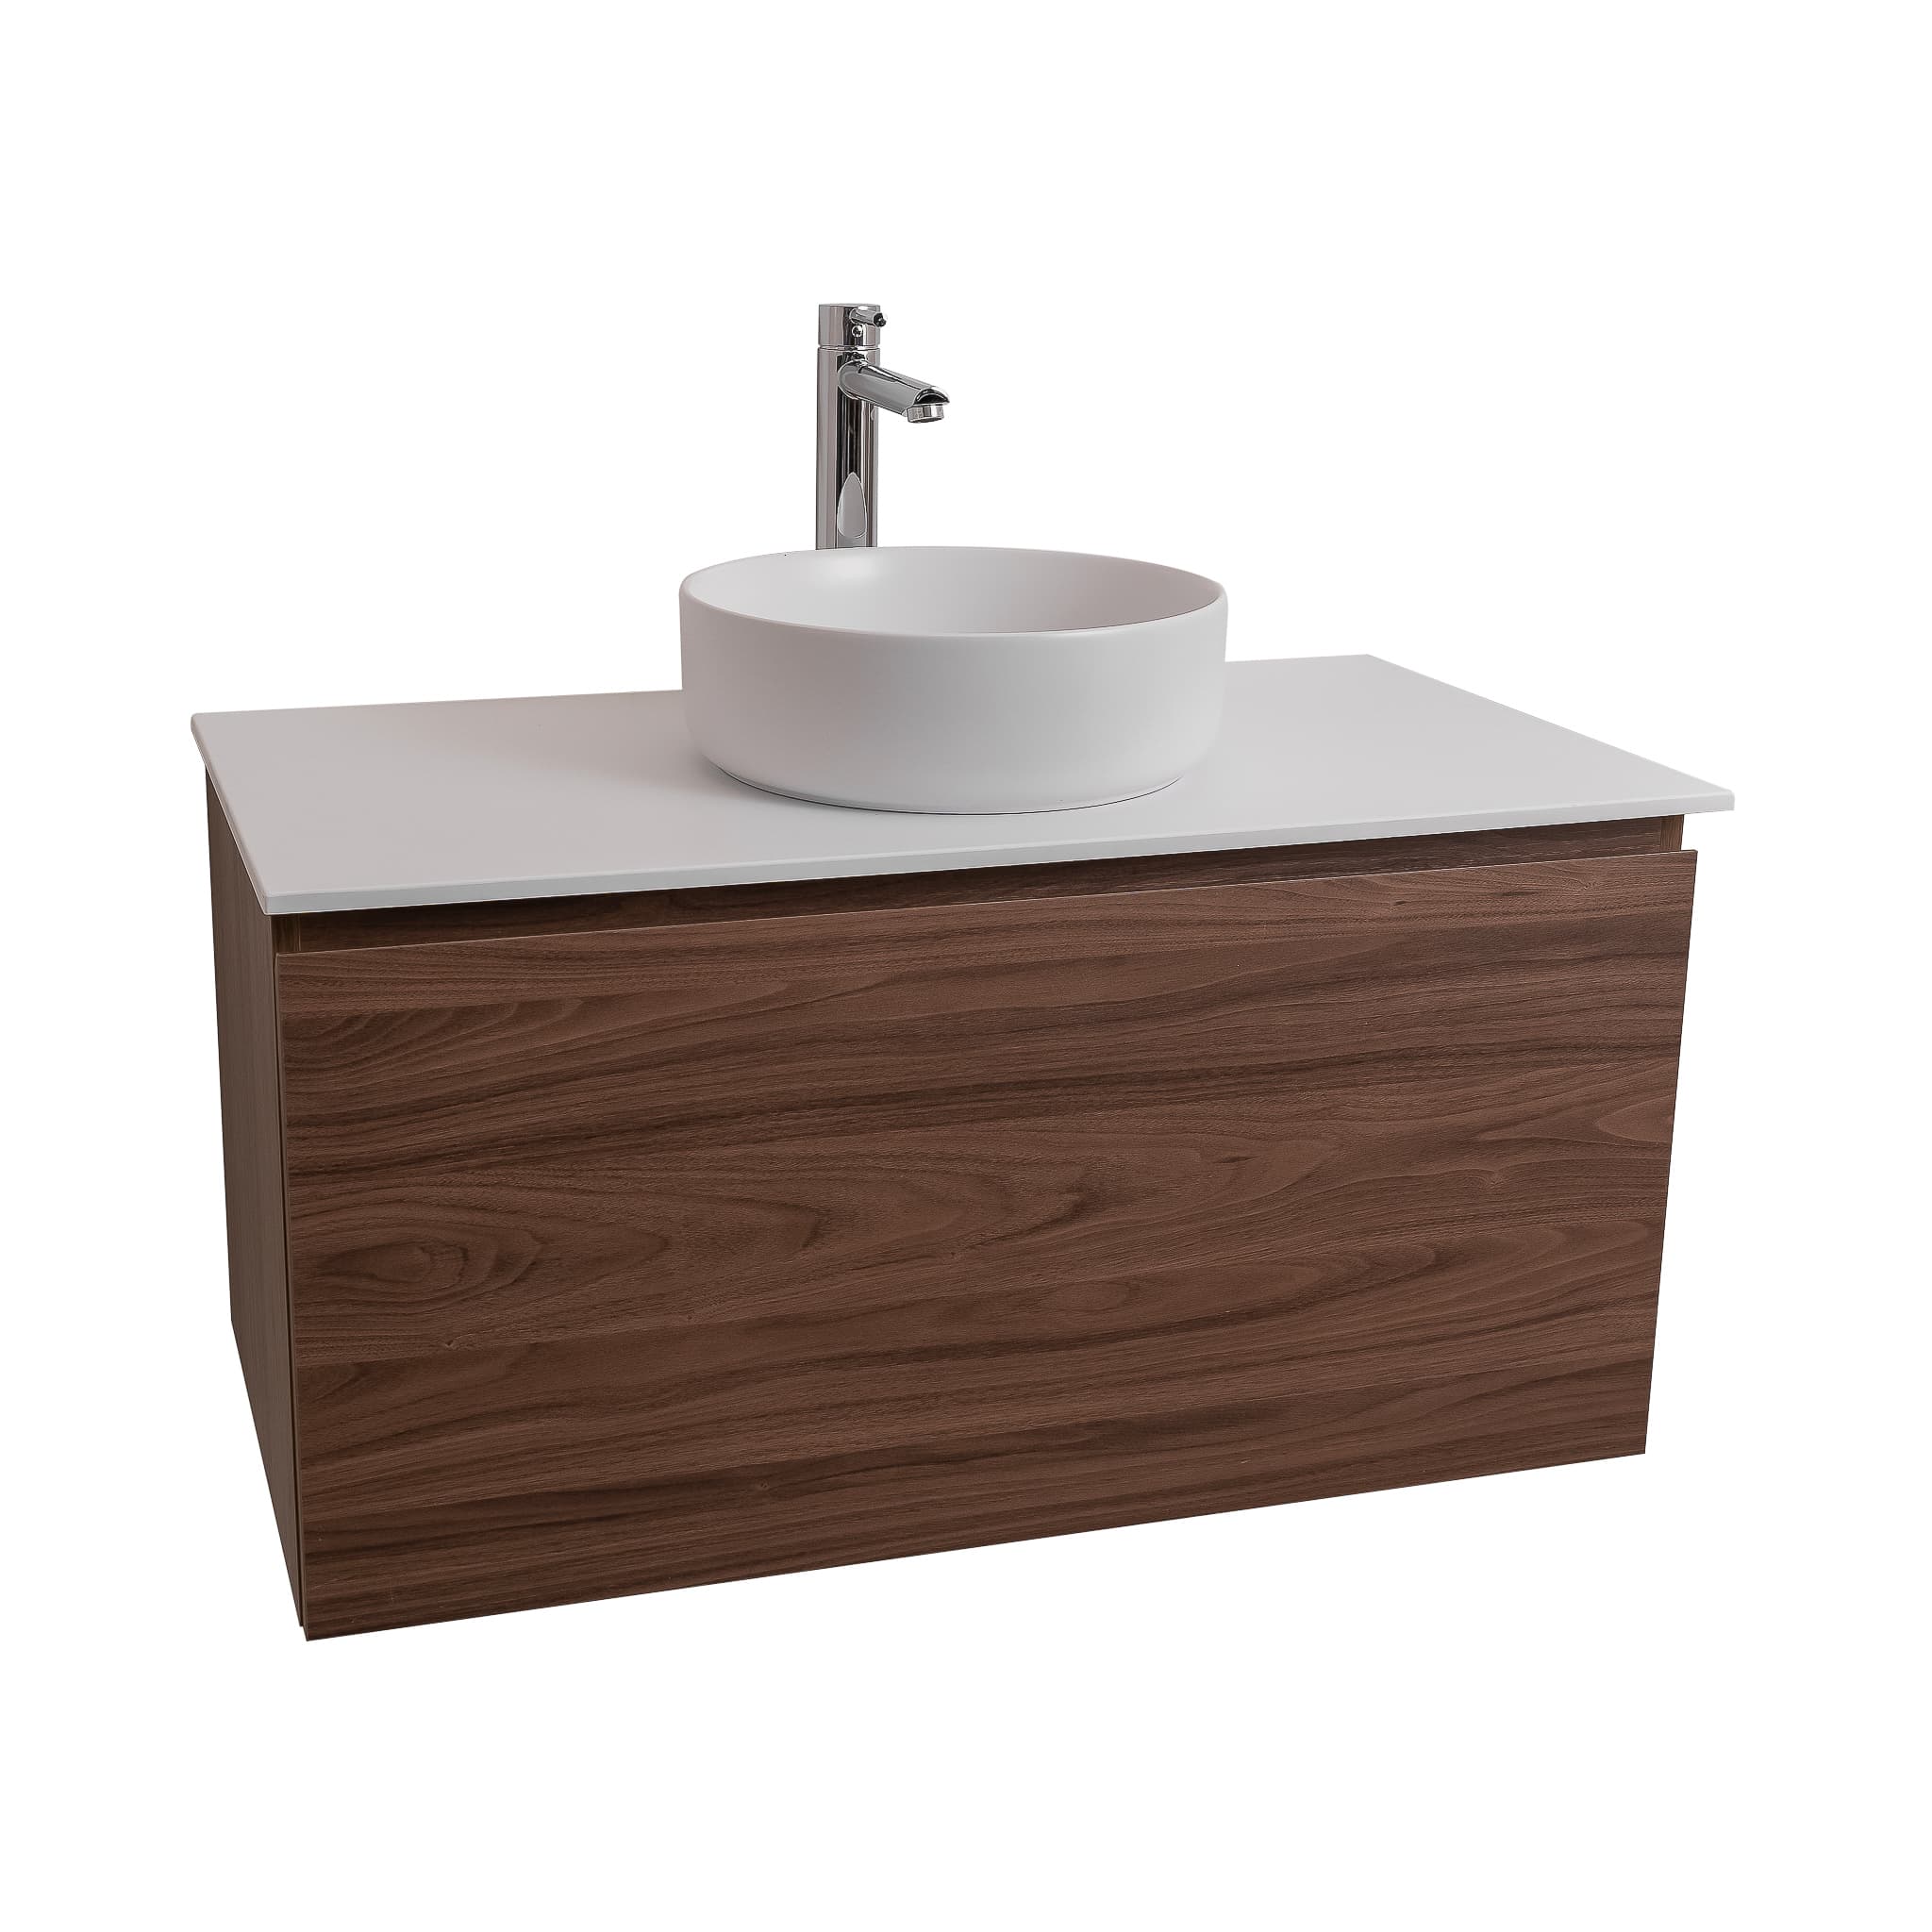 Venice 39.5 Walnut Wood Texture Cabinet, Ares White Top And Ares White Ceramic Basin, Wall Mounted Modern Vanity Set